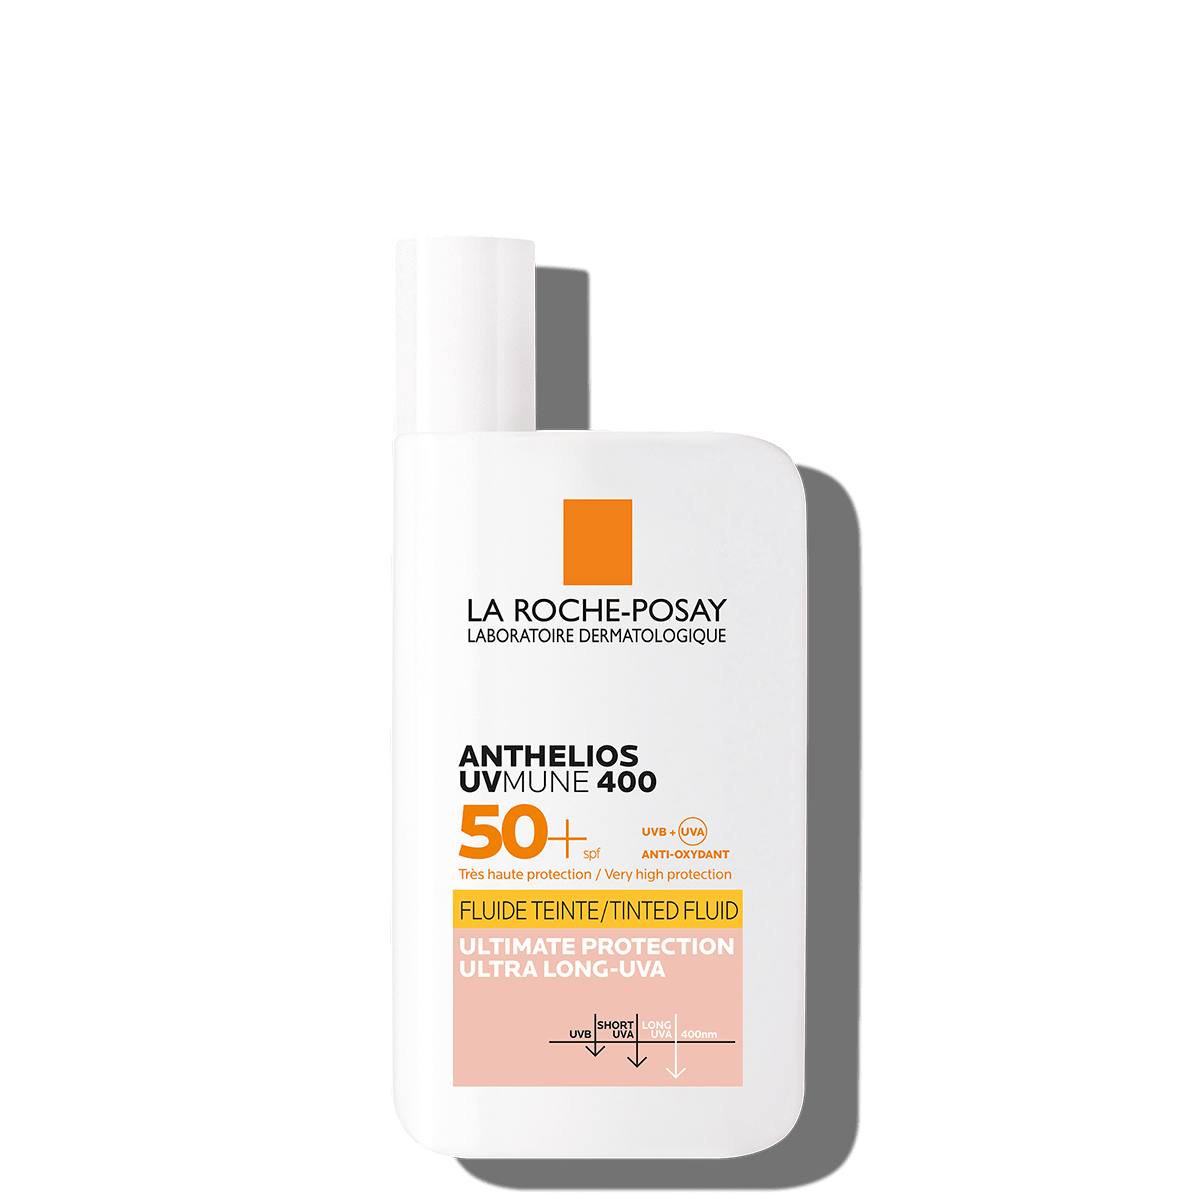 Anthelios UVMUNE 400 Fluid SPF 50+ with color